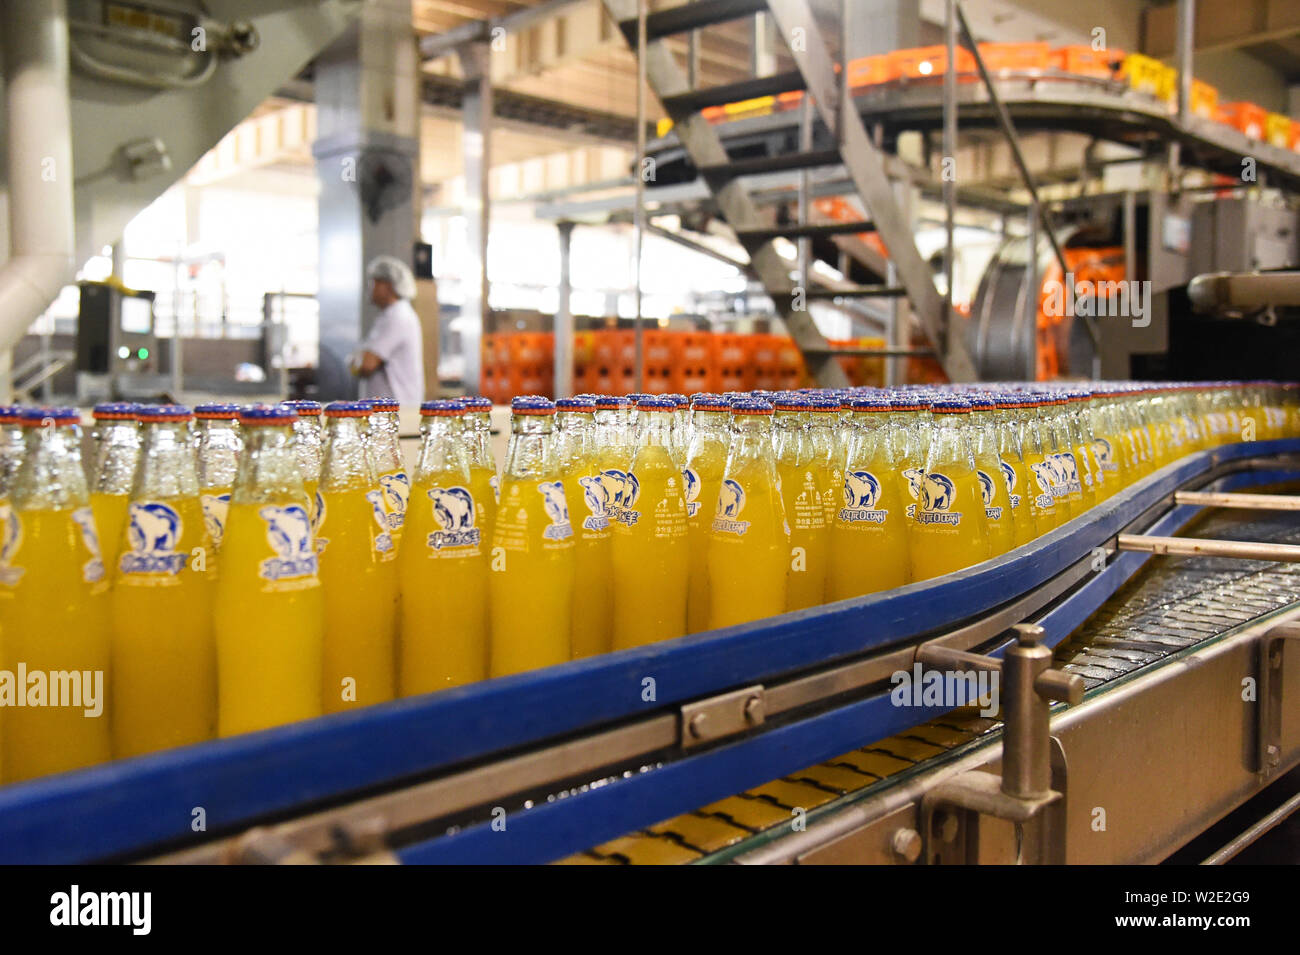 Beijing, China. 21st June, 2019. Photo taken on June 21, 2019 shows the  Arctic Ocean soft drink production line in Daxing District of Beijing,  capital of China. With an iconic polar bear